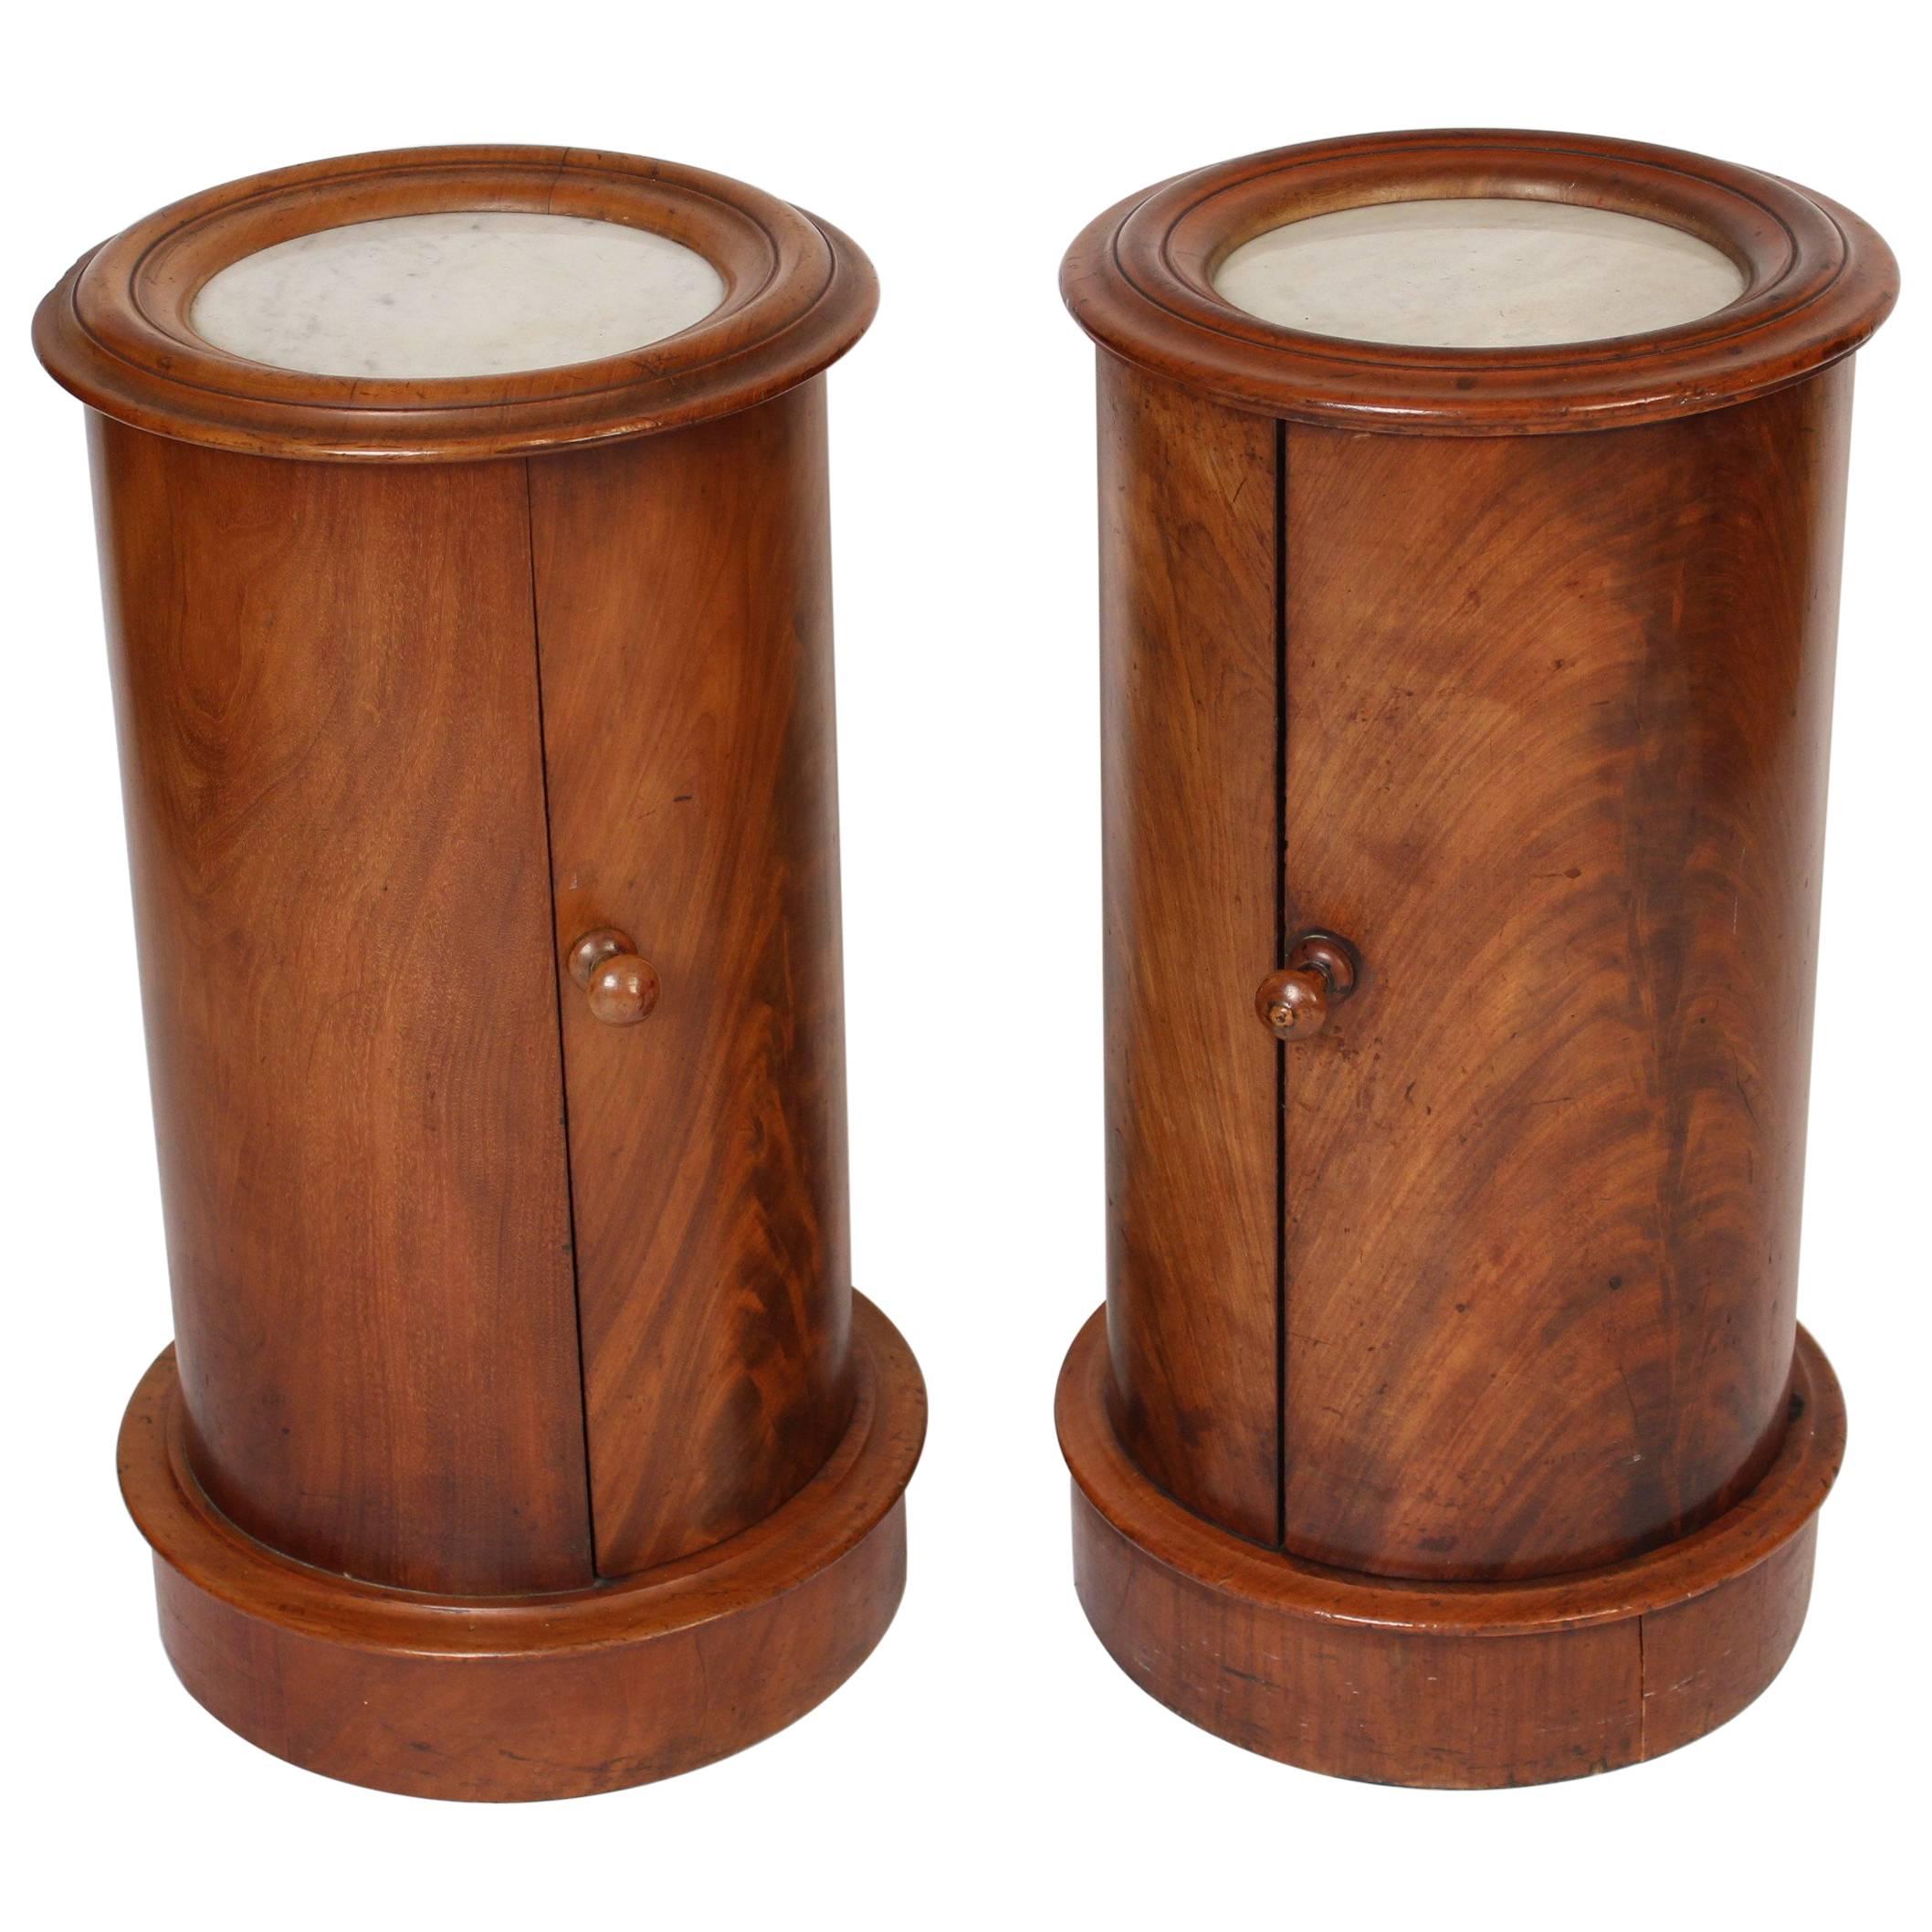 Matched Pair of Cylinder Commodes